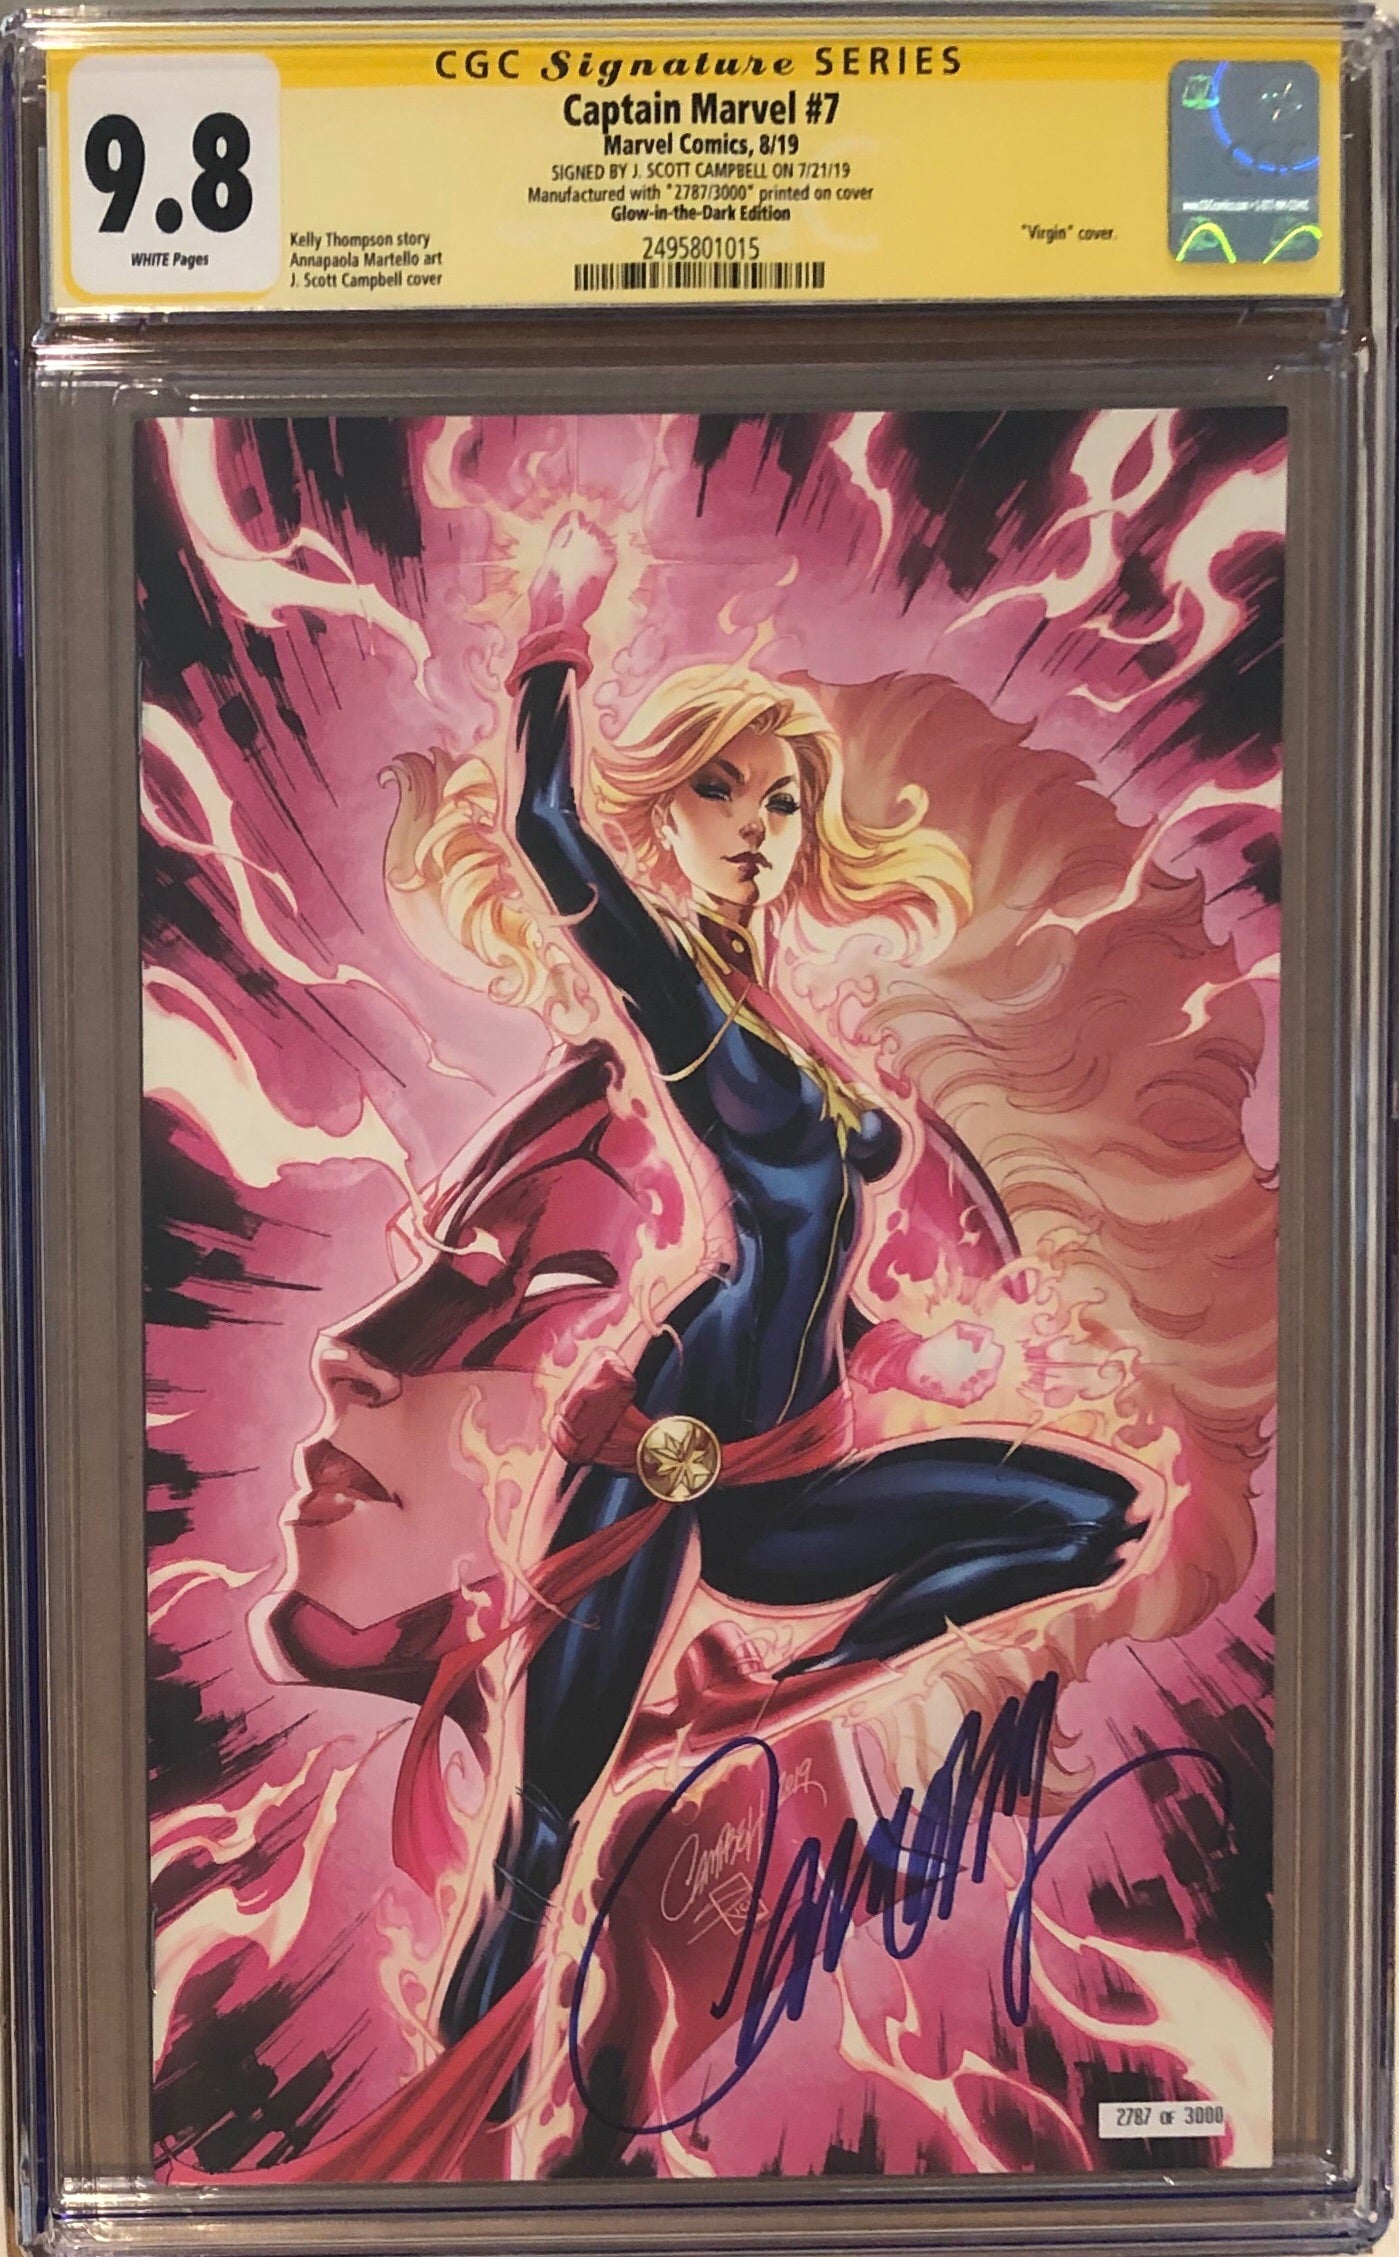 Captain Marvel #7 J. Scott Campbell SDCC Glow in the Dark Exclusive CGC 9.8 SS